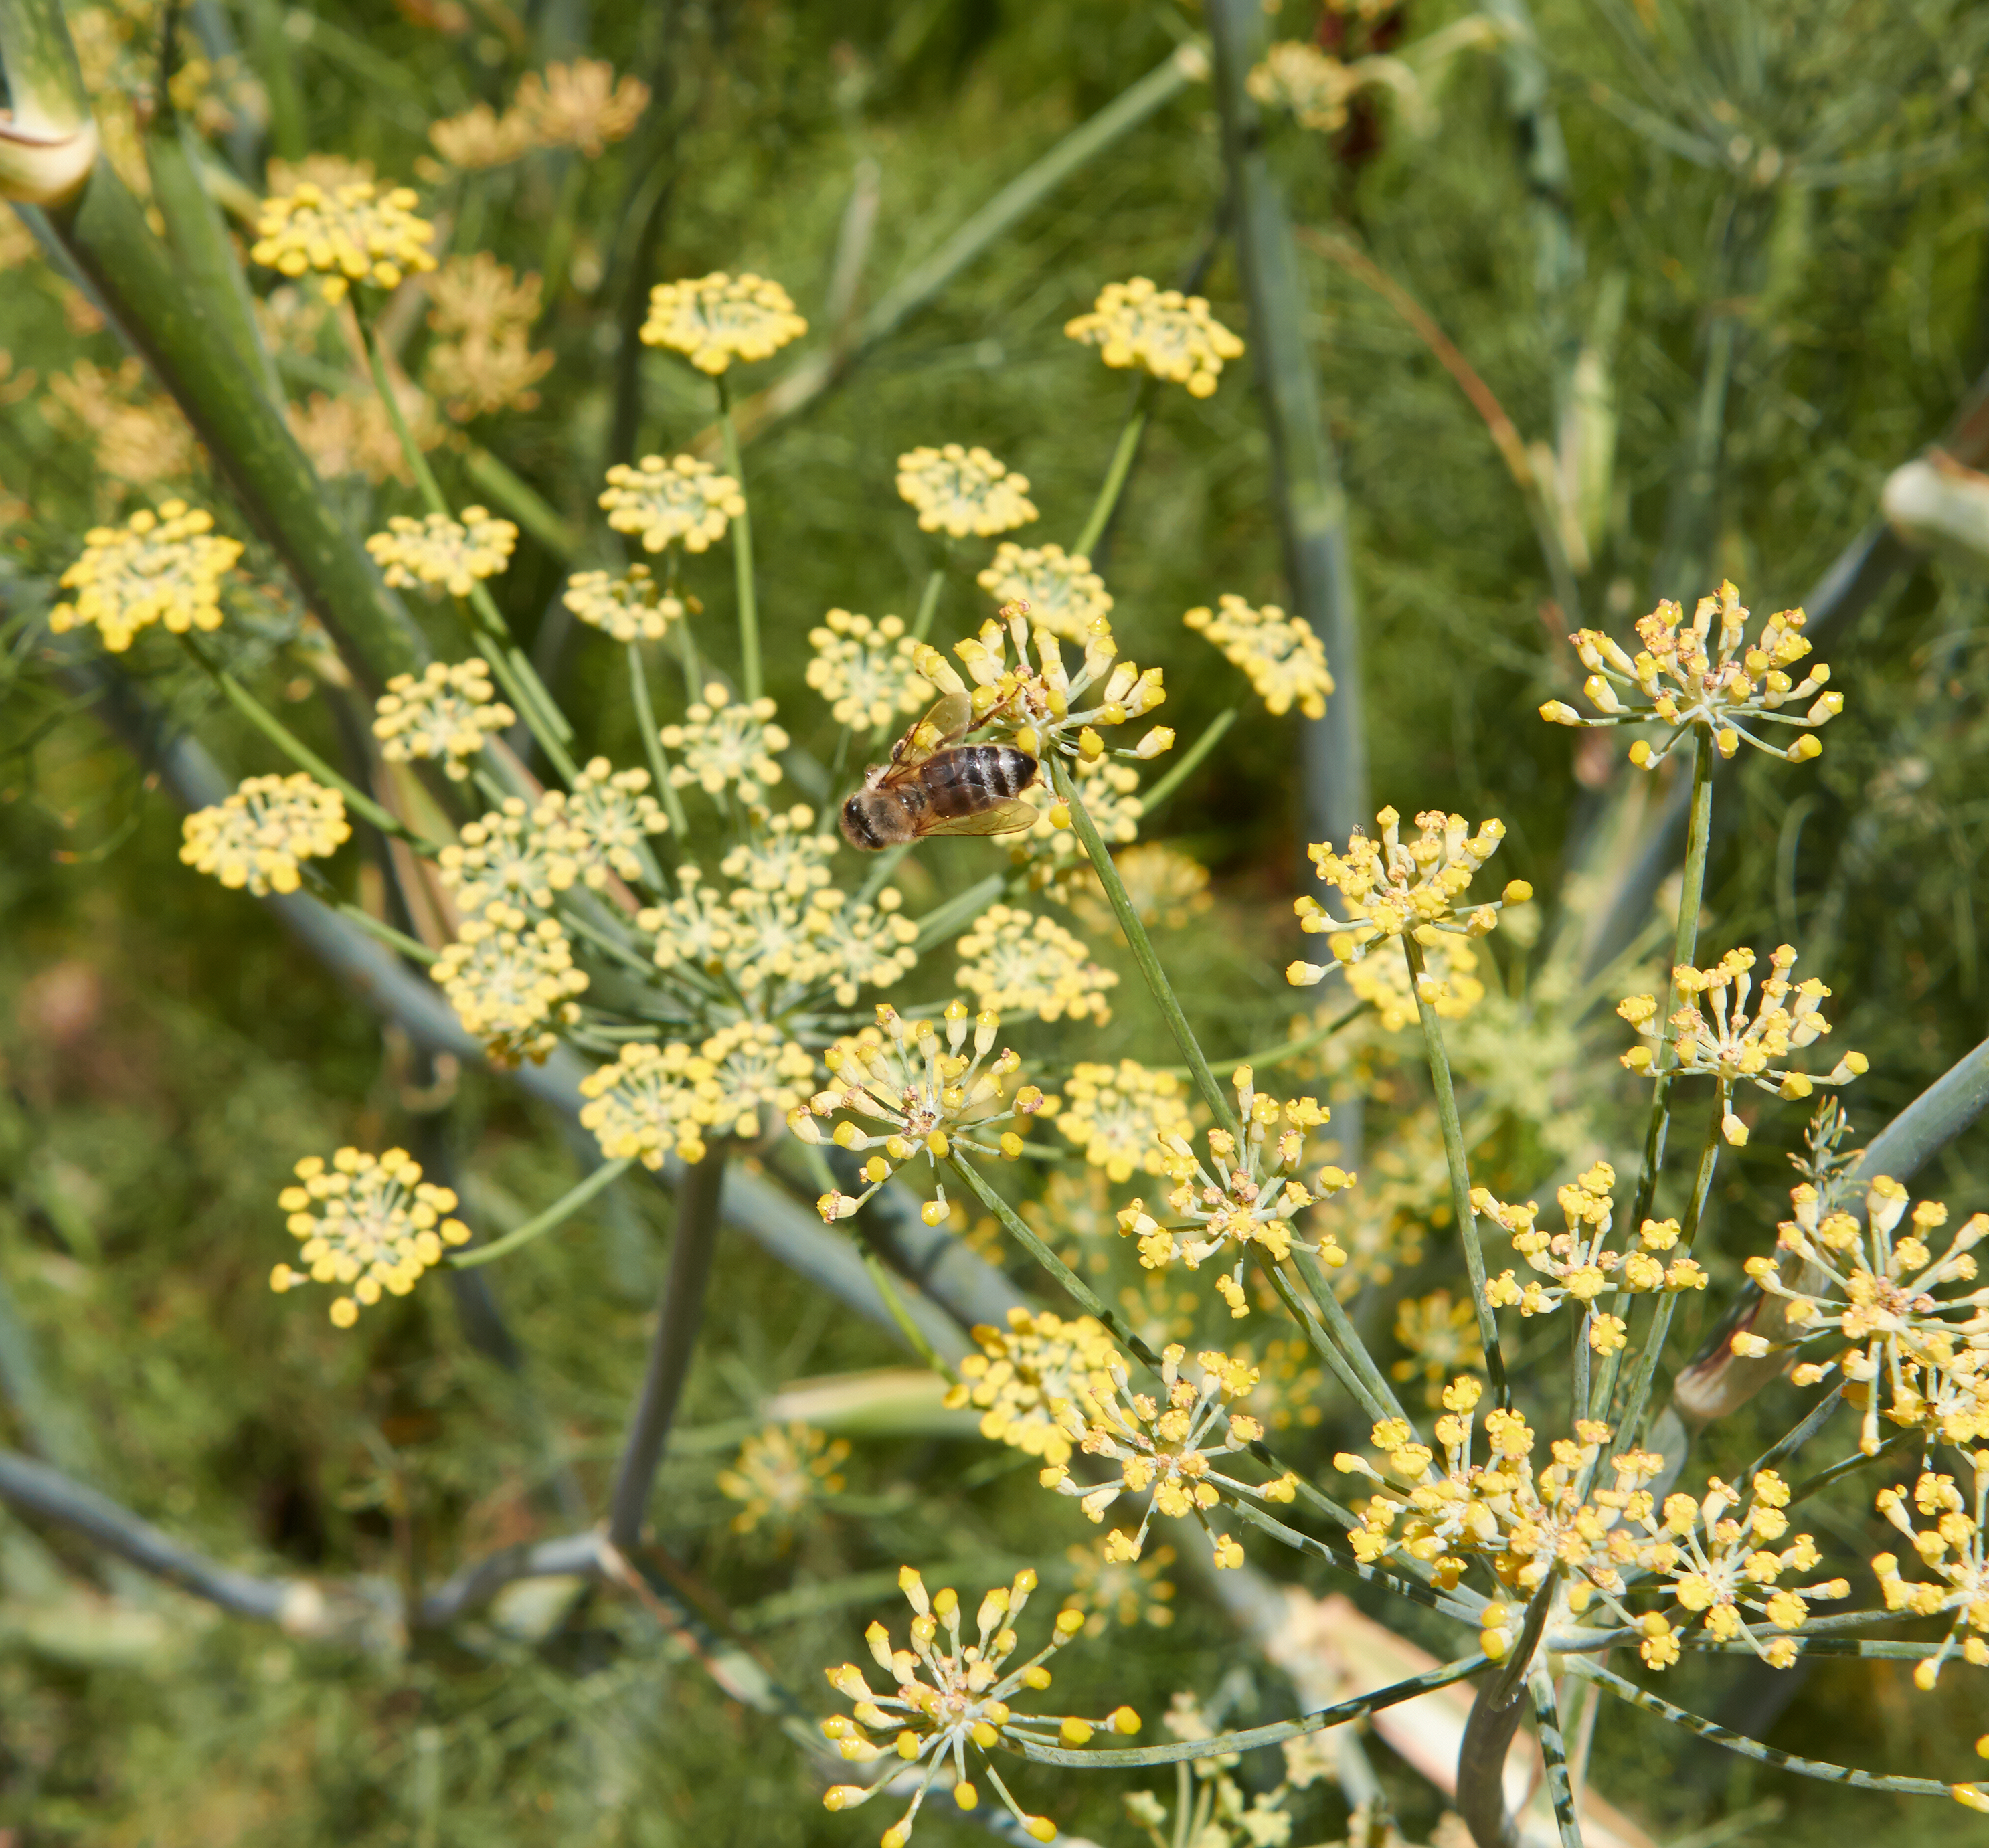 You know I loved learning that there are two active bee hives on the Krug property. This bee is foraging in the fennel.